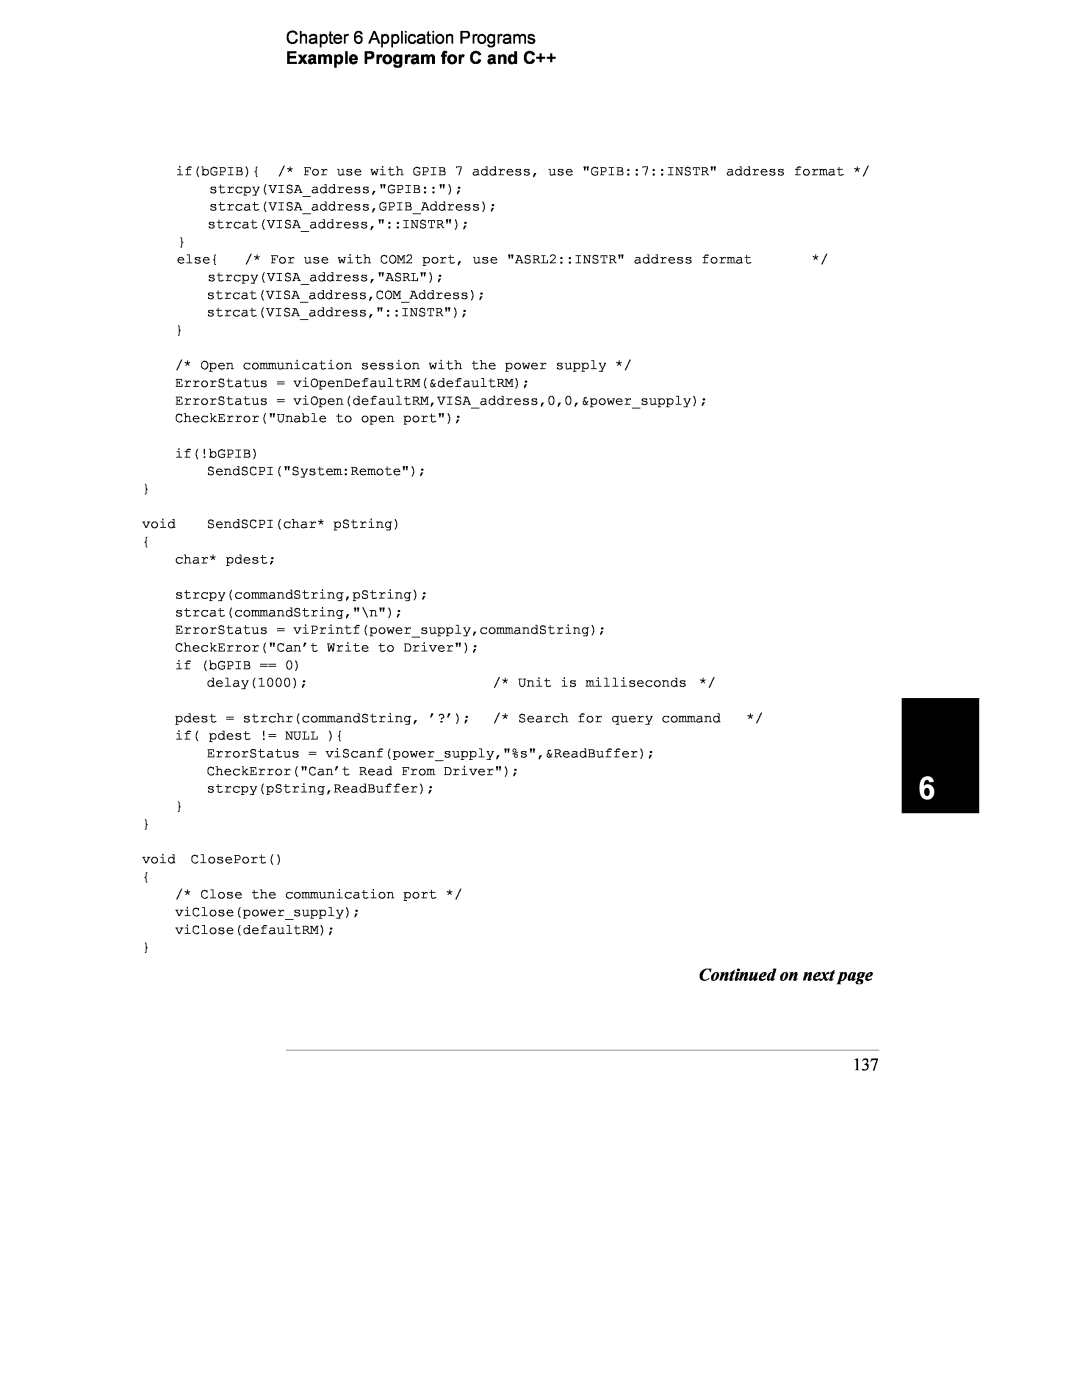 Agilent Technologies E3633A, E3634A manual Application Programs Example Program for C and C++, Continued on next page 137 